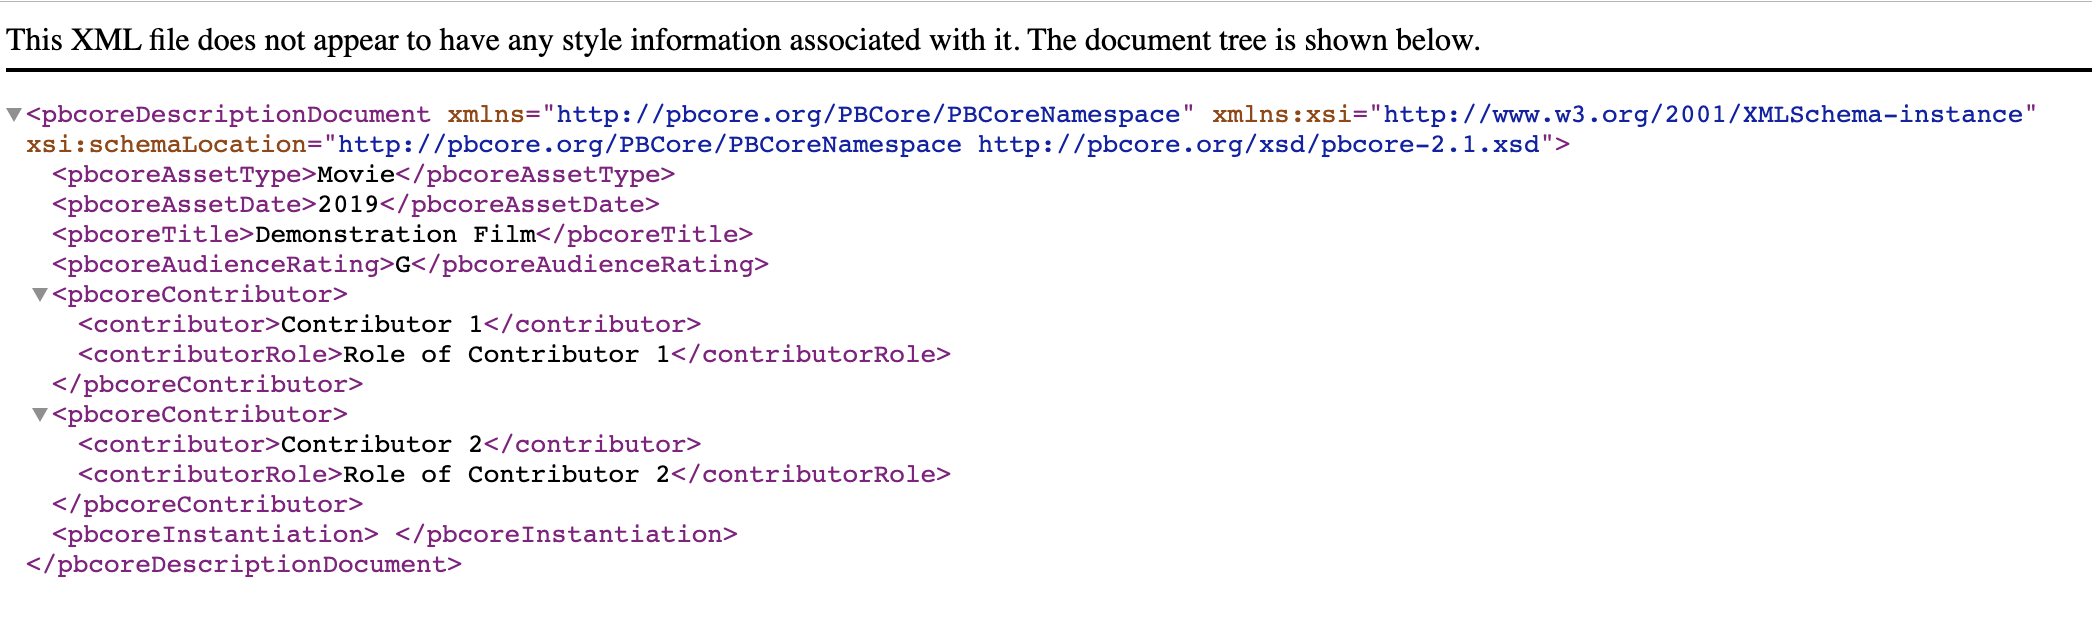 Generated XML from the PBCore metadata. Shows container element "Contributor" with sub-elements "contributor" and "contributorRole" containing the values "Contributor 1" and "Role of Contributor 1"